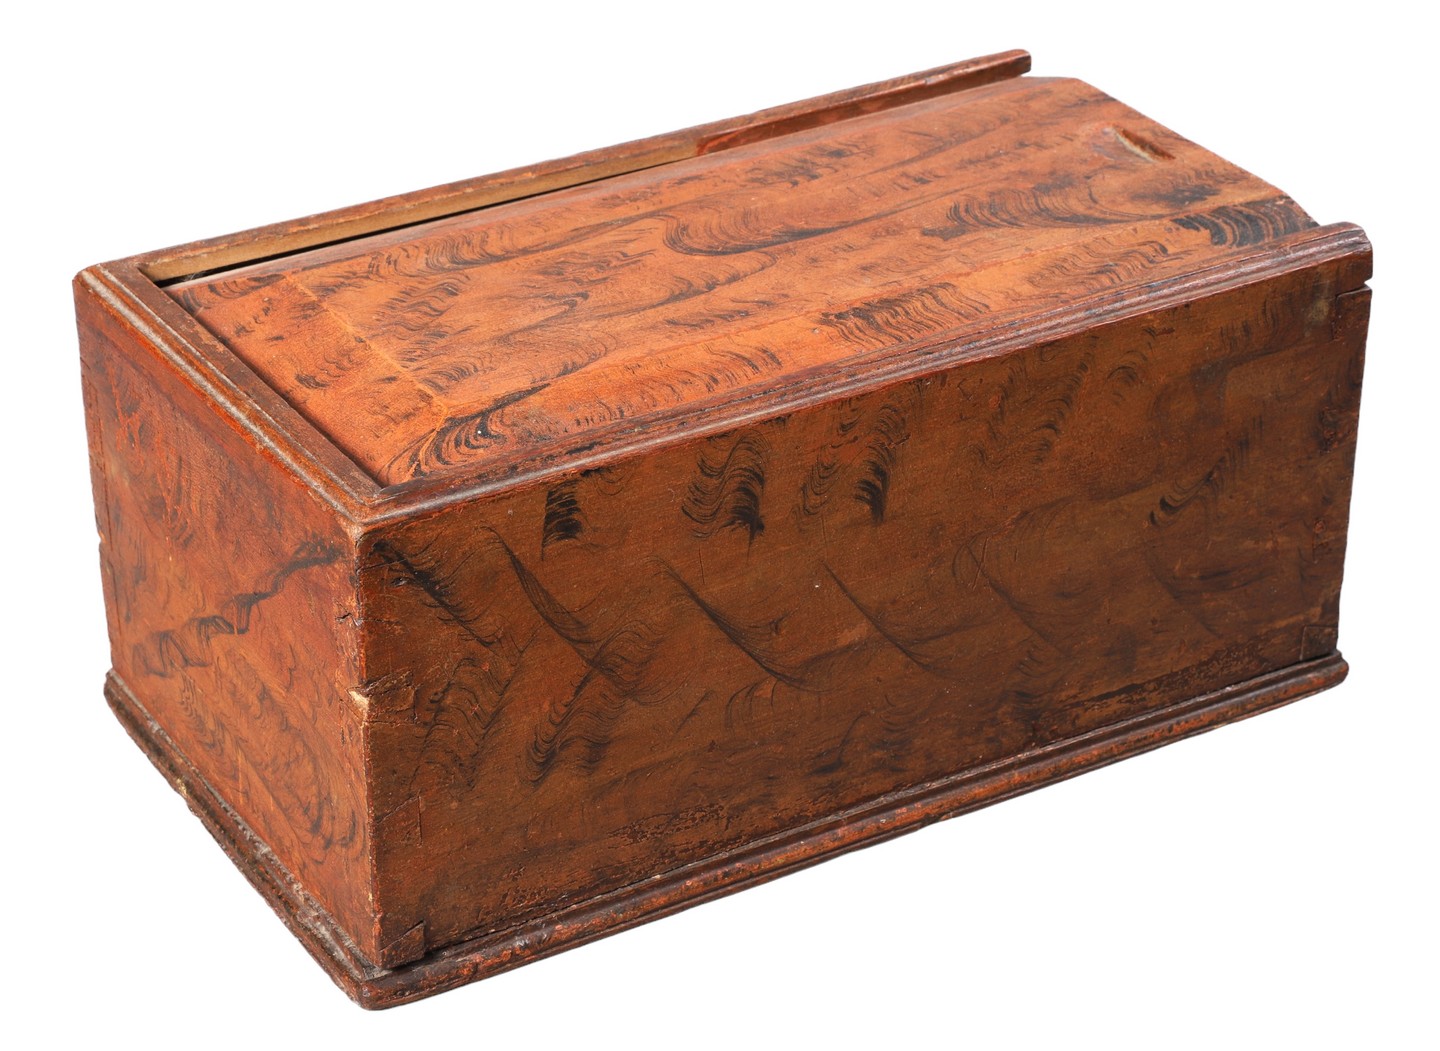 Wooden faux grain box, dovetailed